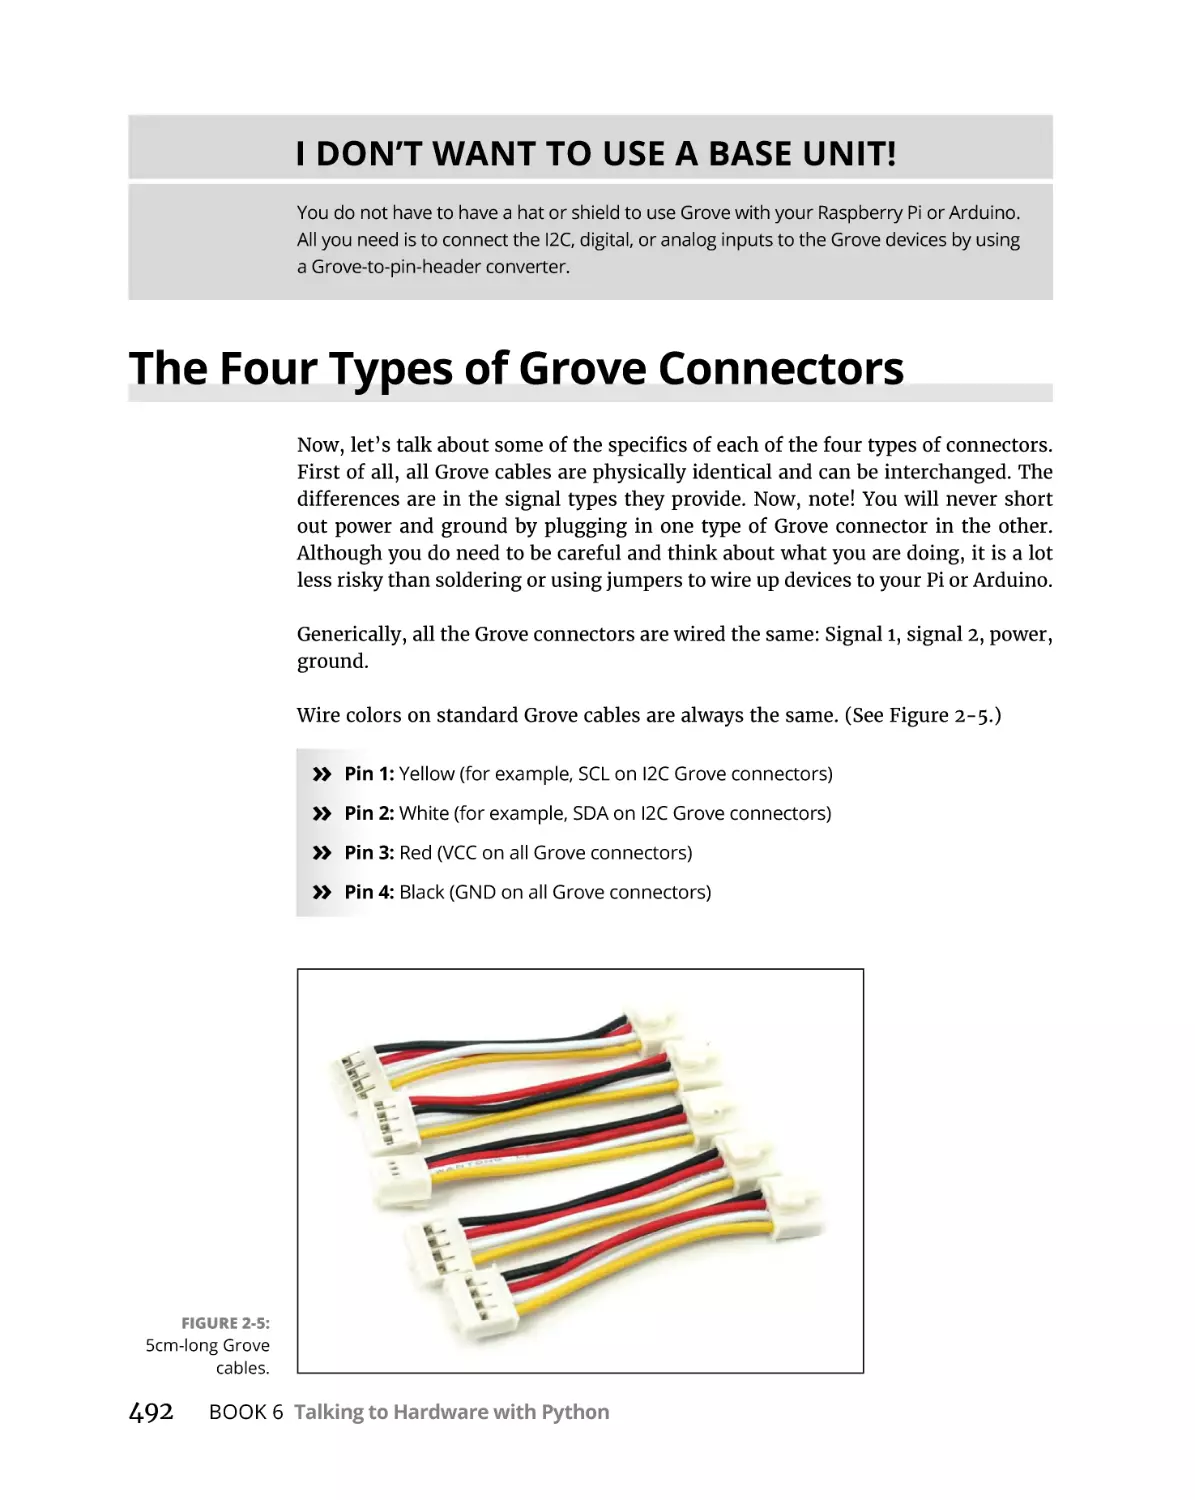 The Four Types of Grove Connectors